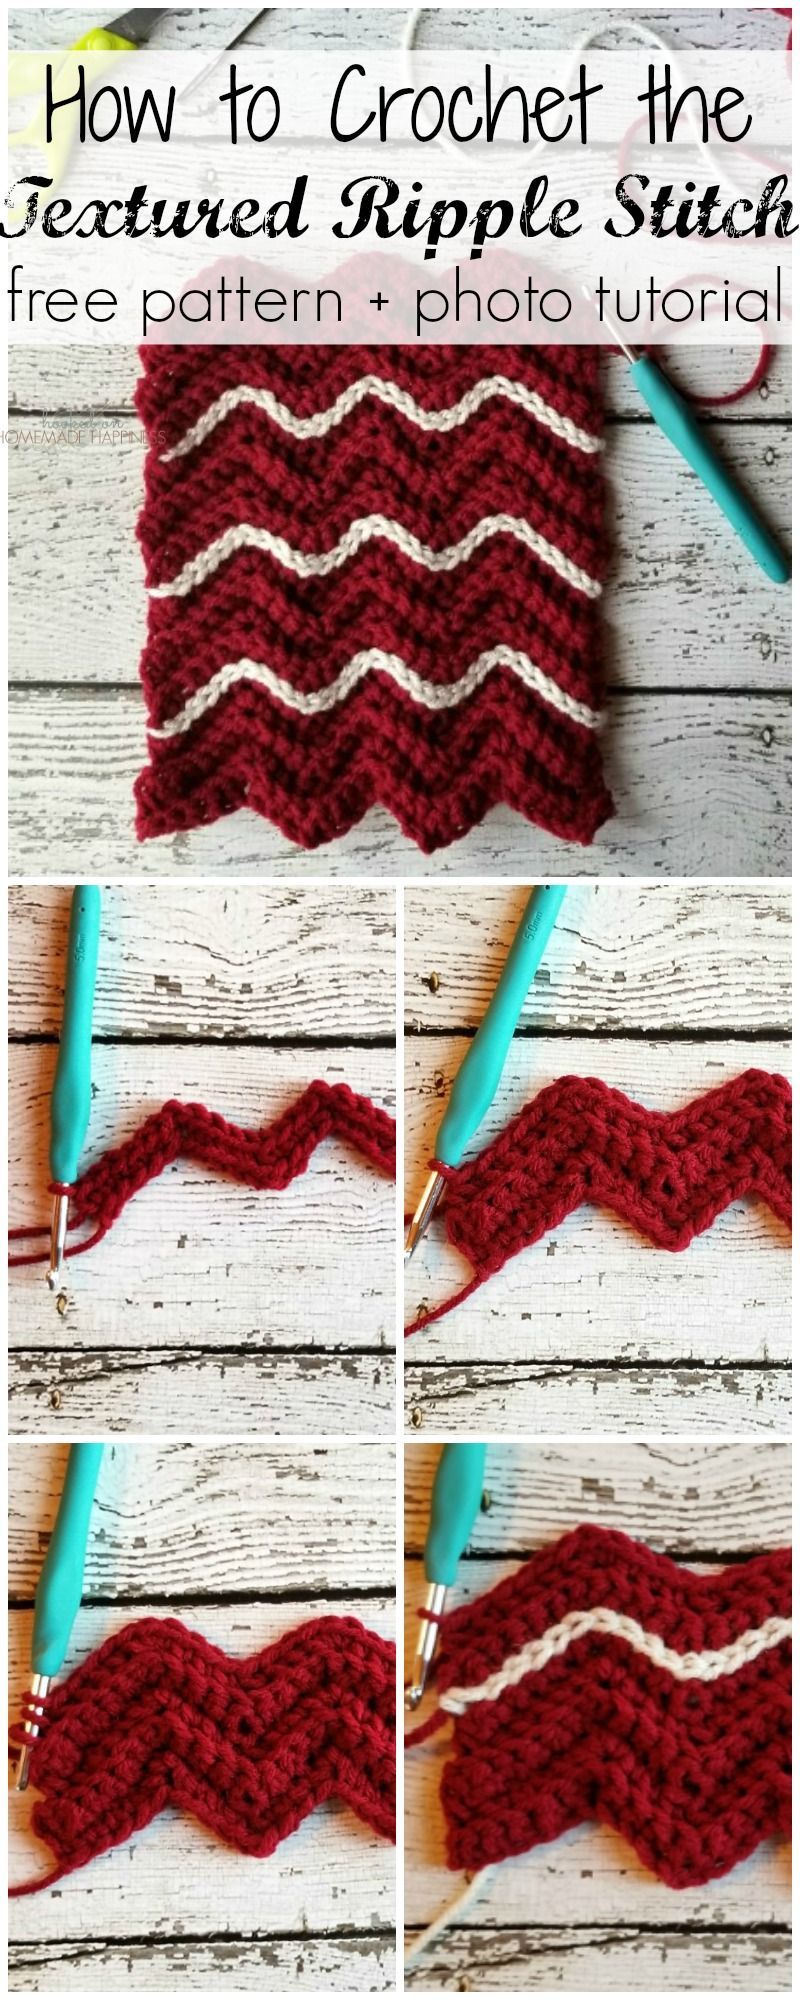 How to Crochet the Textured Ripple Stitch -   22 thin yarn crafts
 ideas